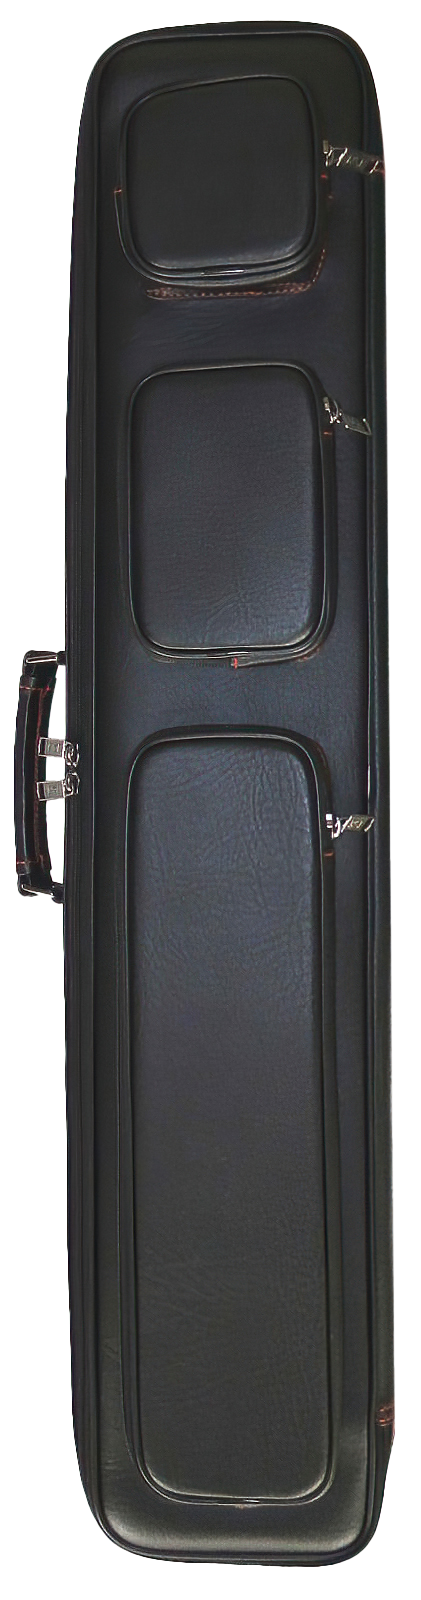 J&J 4x8 Butterfly Soft Sided DOUBLE STRAP Cue Case Pool Cue Case